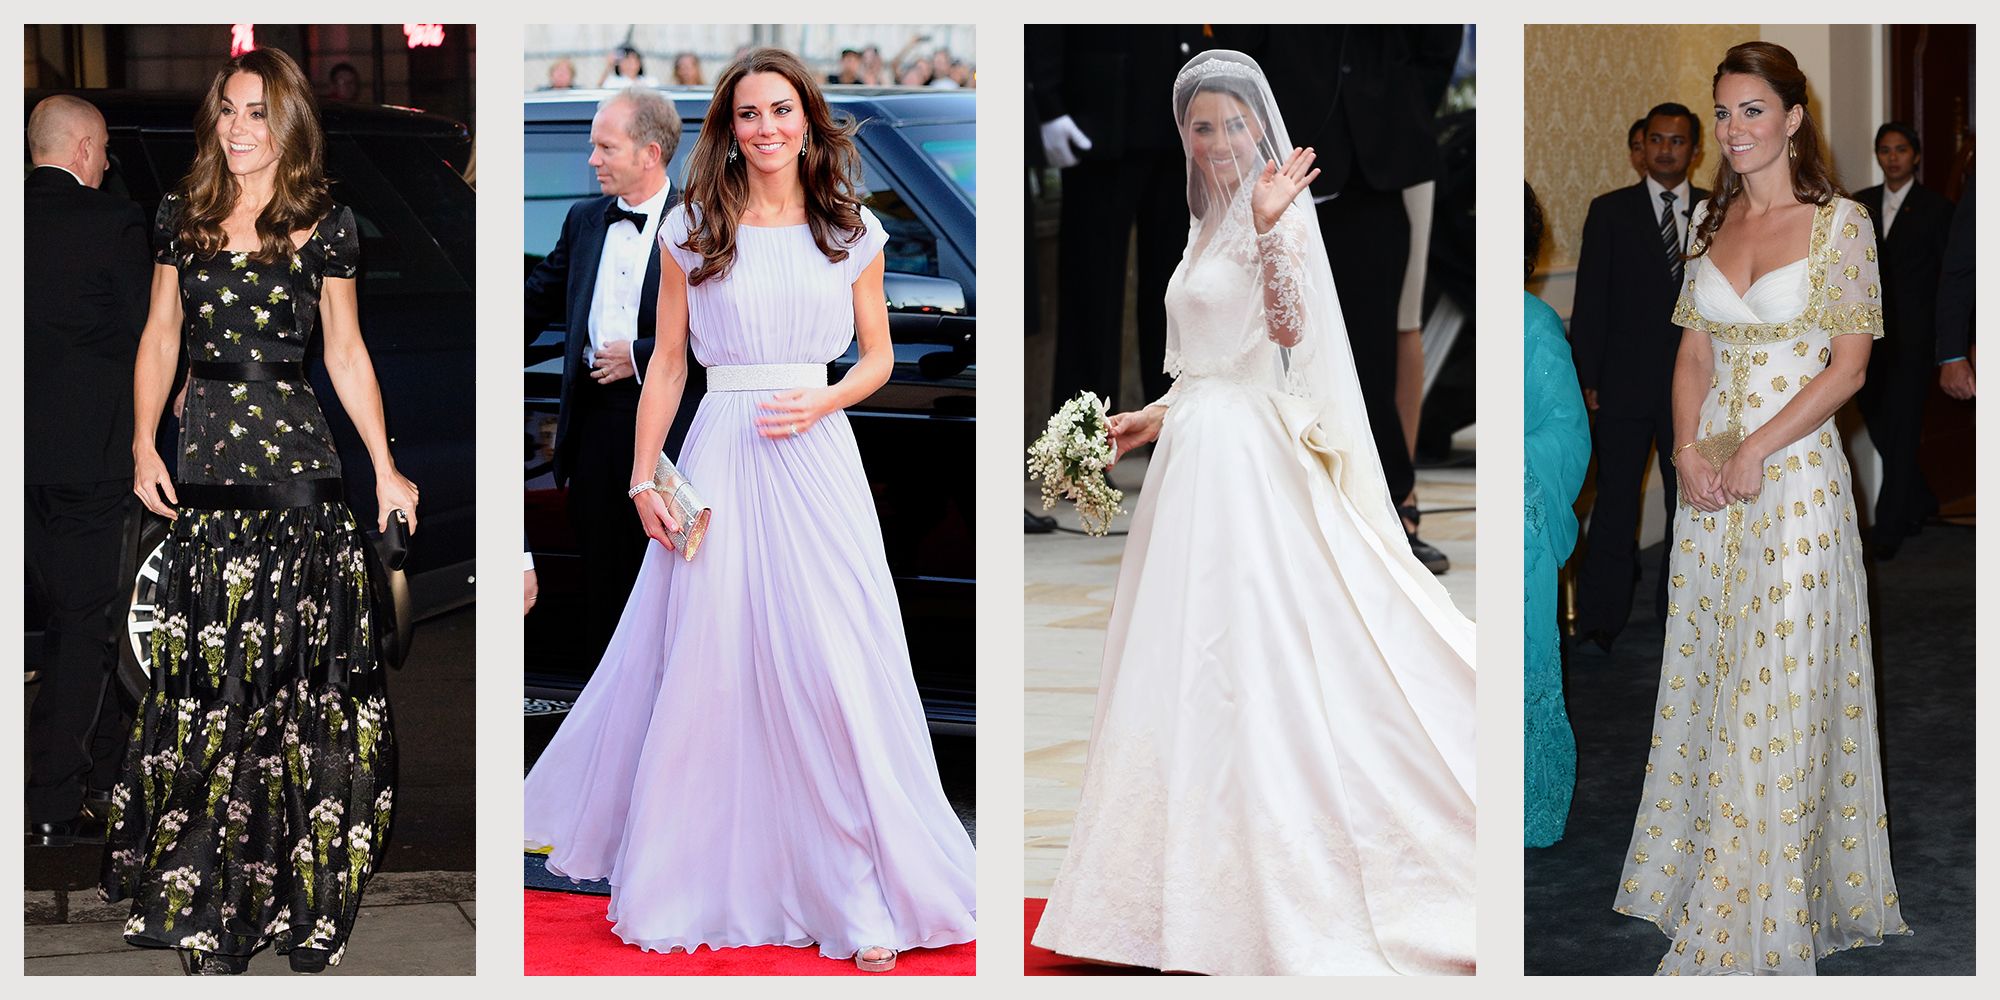 Kate Middleton's Alexander McQueen Outfits - Photos of Kate in